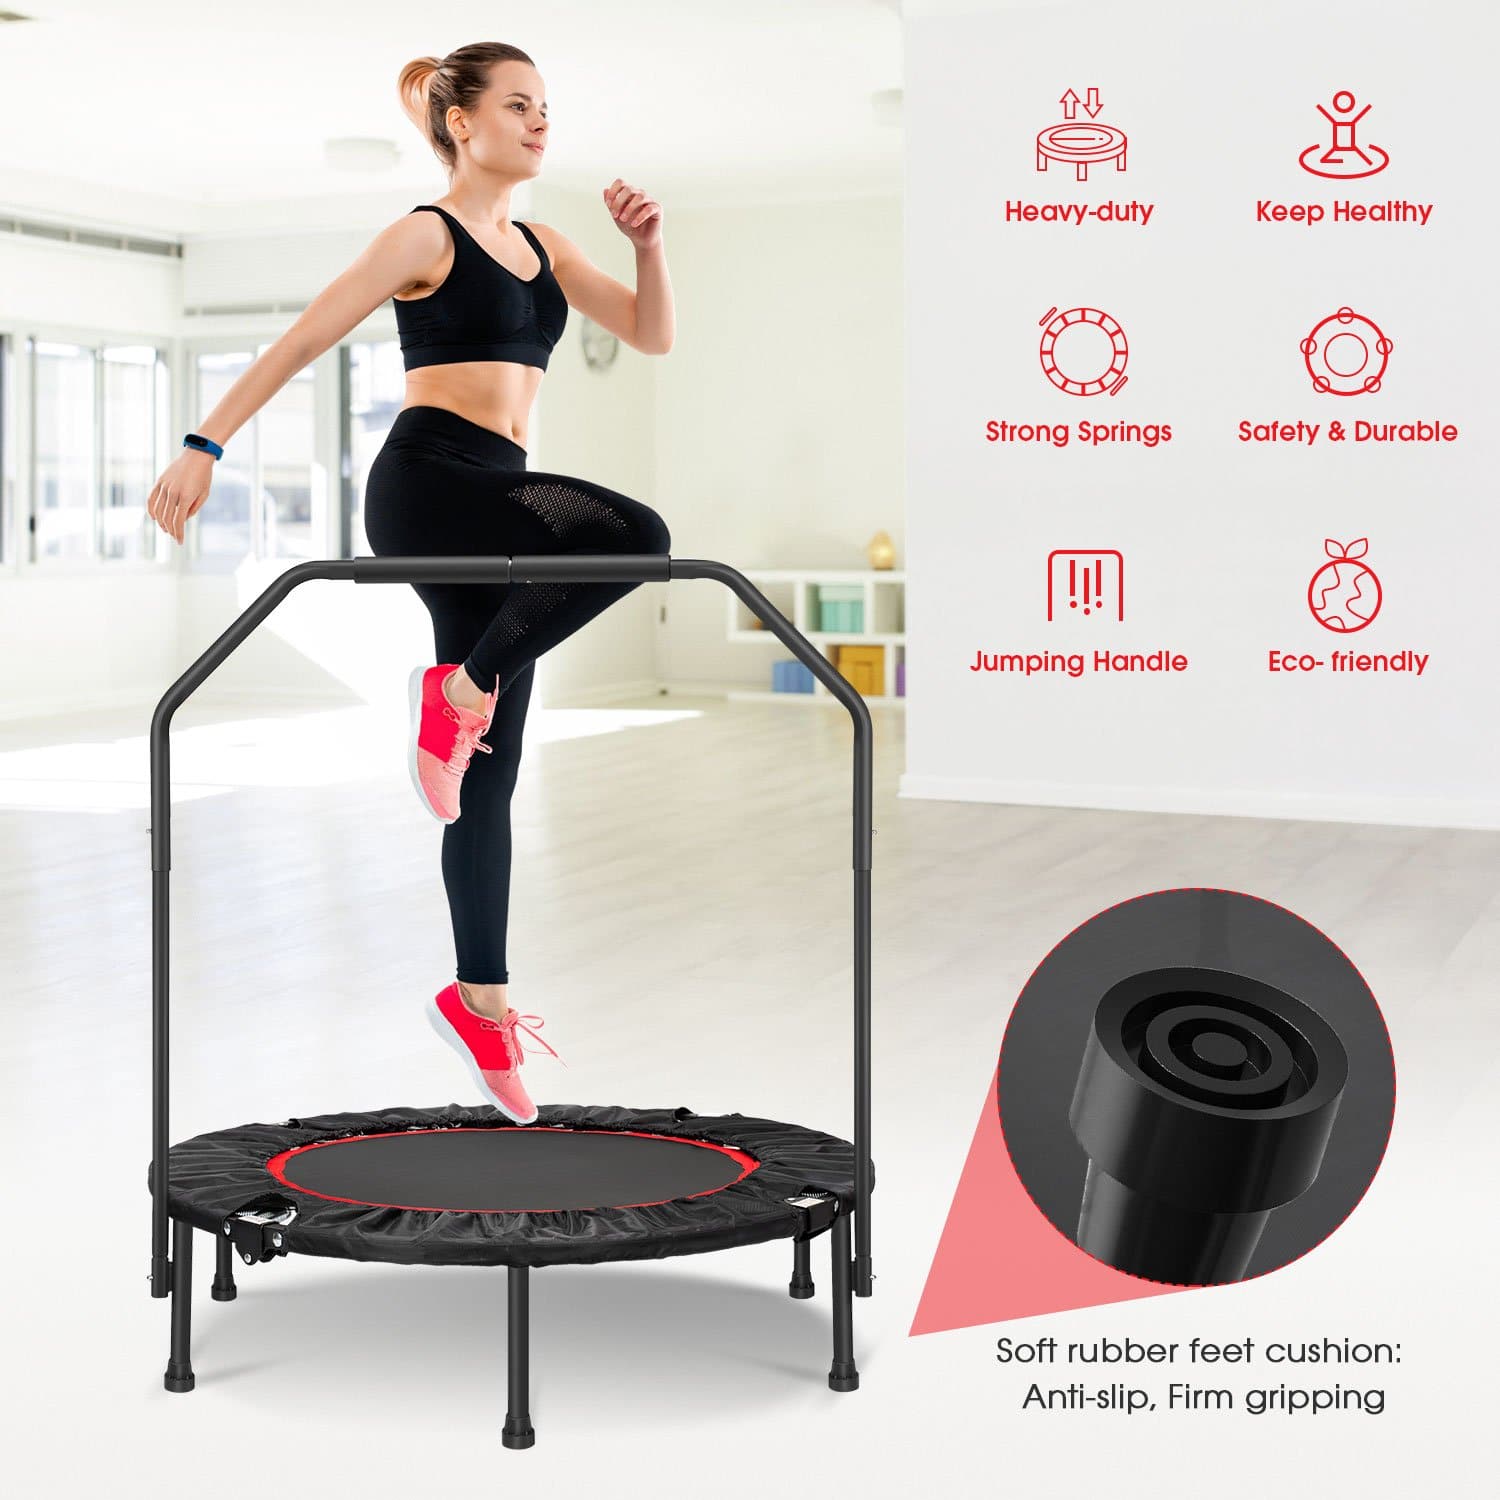 FITNESS TRAMPOLINE with Safety Handle